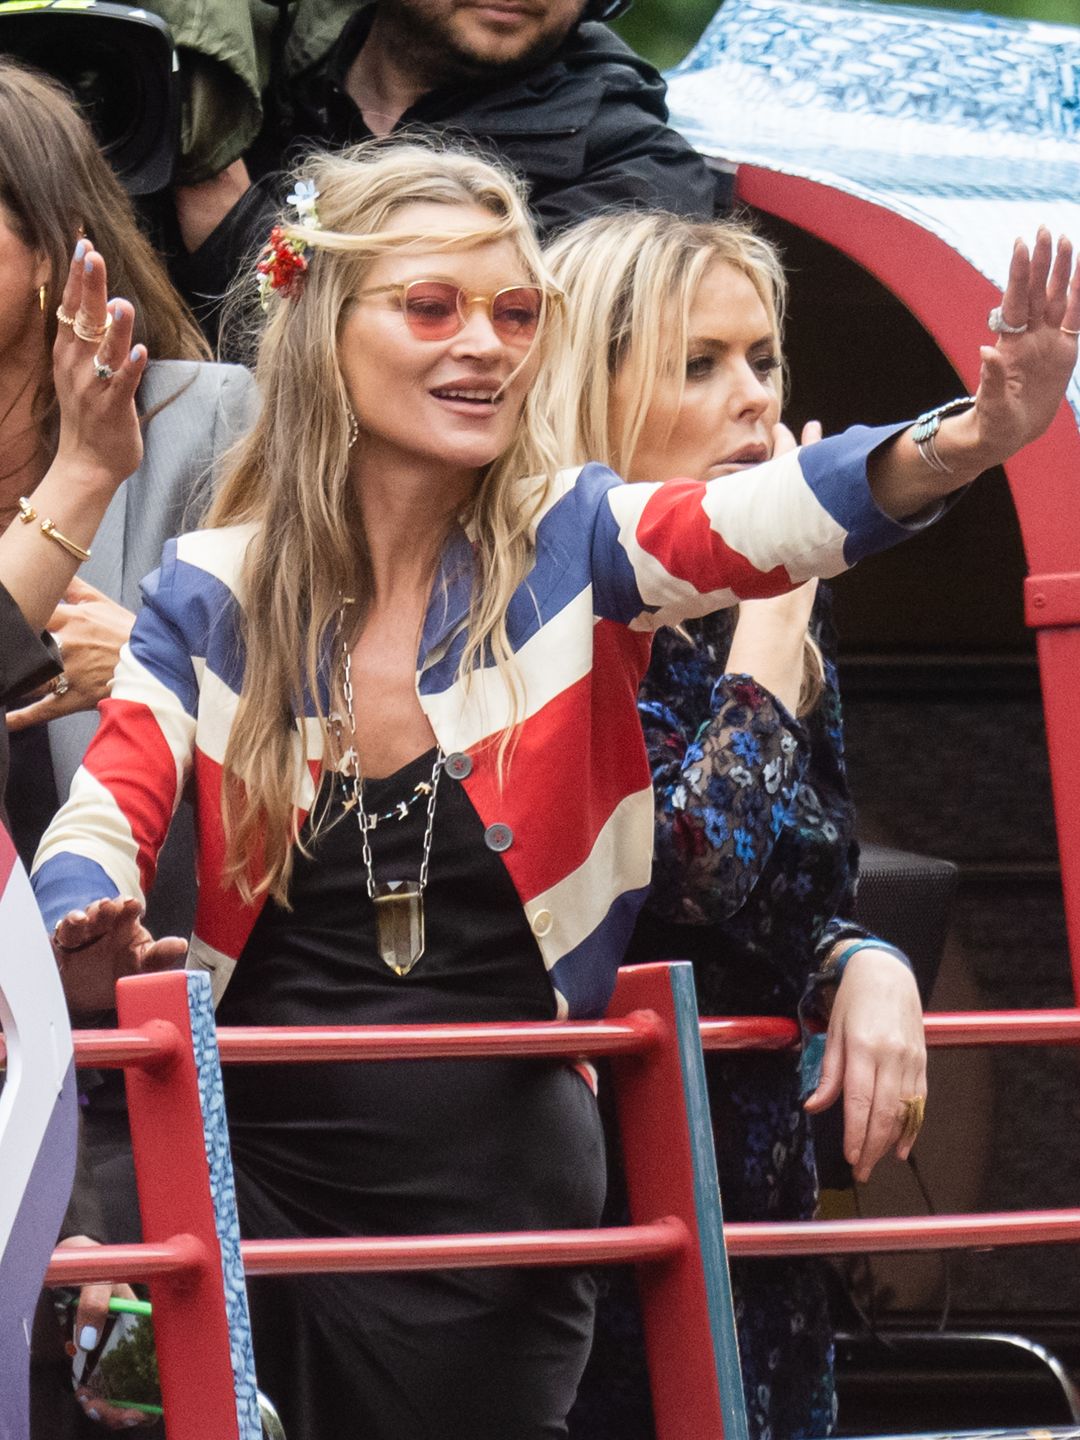 Kate Moss sports a Union Jack printed jacket at the Platinum Jubilee Pageant on June 05, 2022 